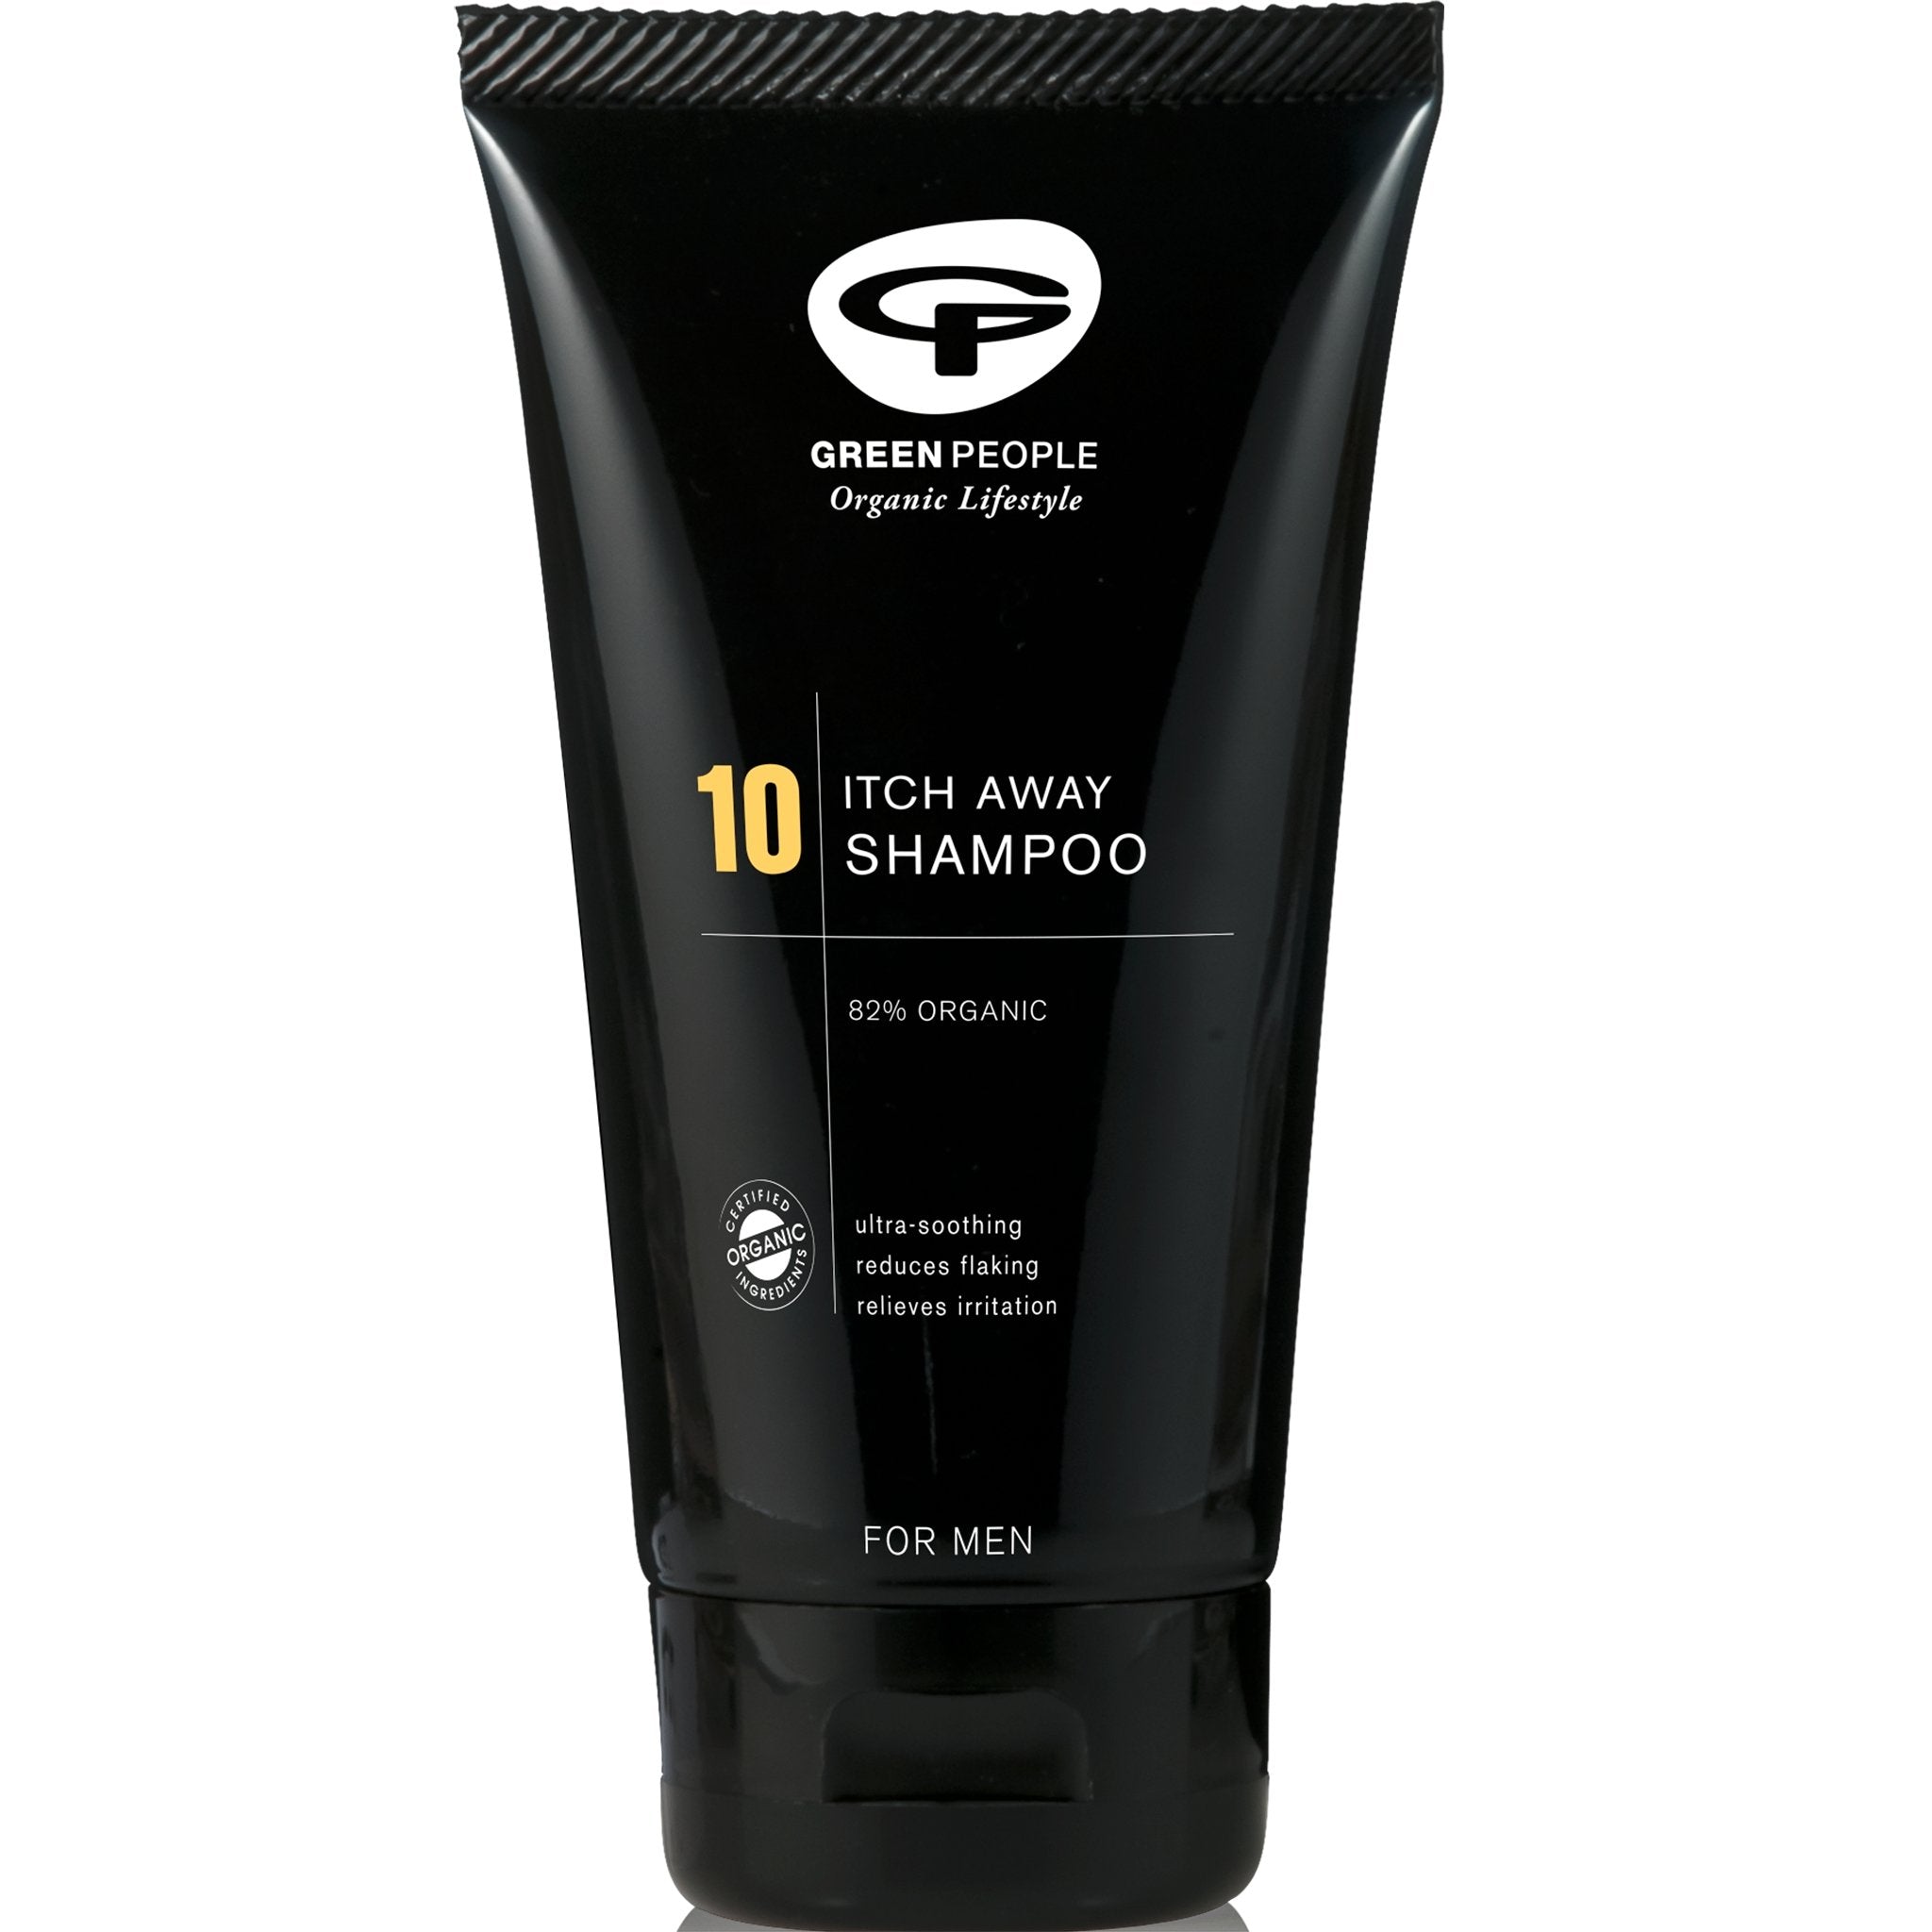 Green People for Men - No. 10 Itch Away Shampoo - mypure.co.uk